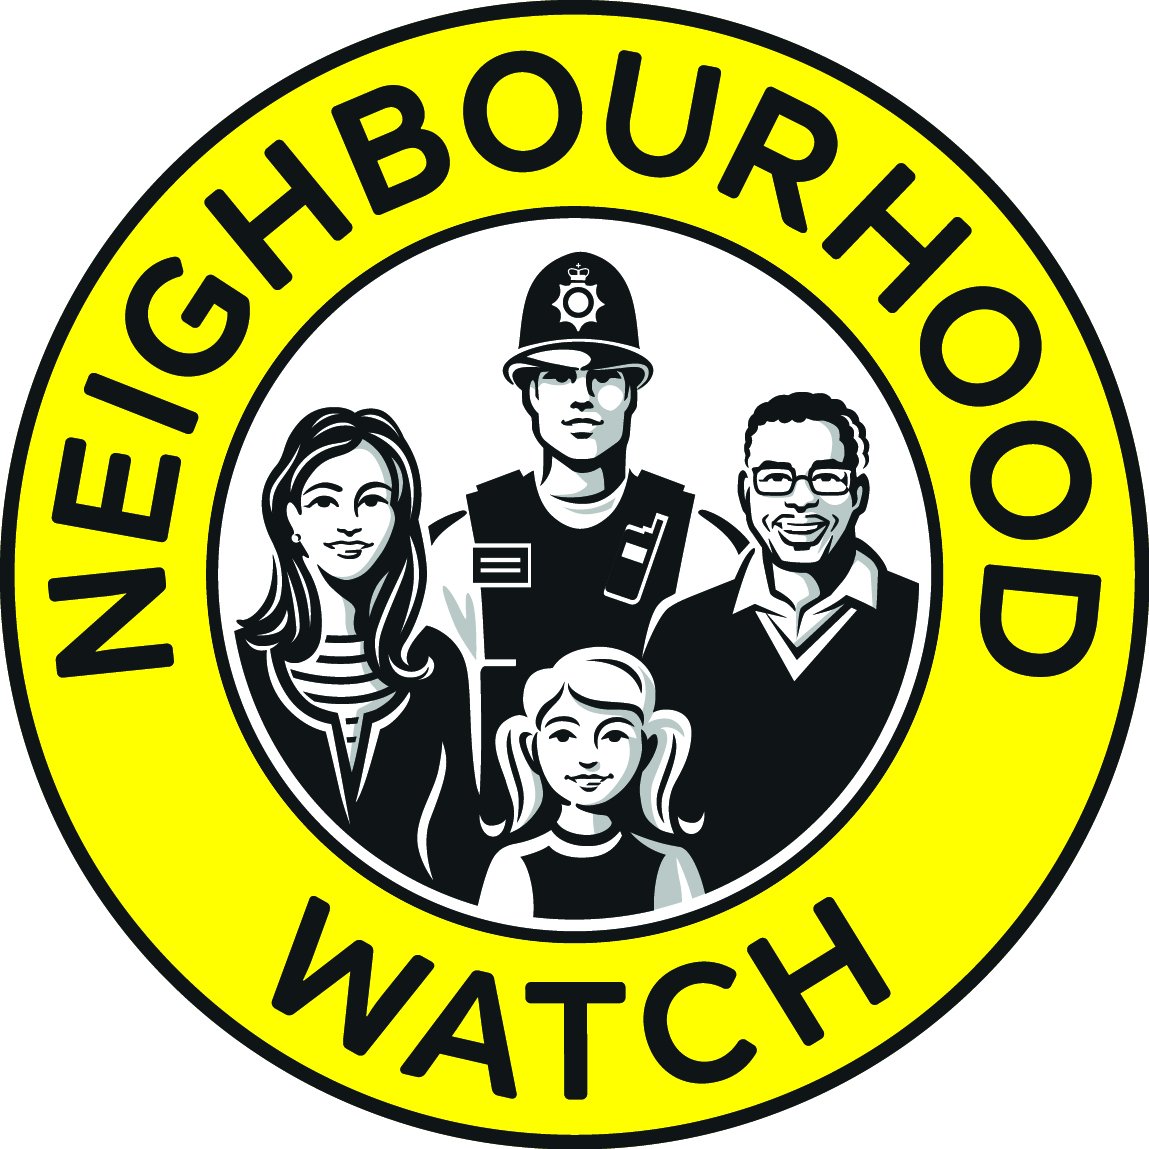 Neighbourhood Watch is a voluntary network of schemes where neighbours come together, with the police and local partners, to build safe and friendly communities